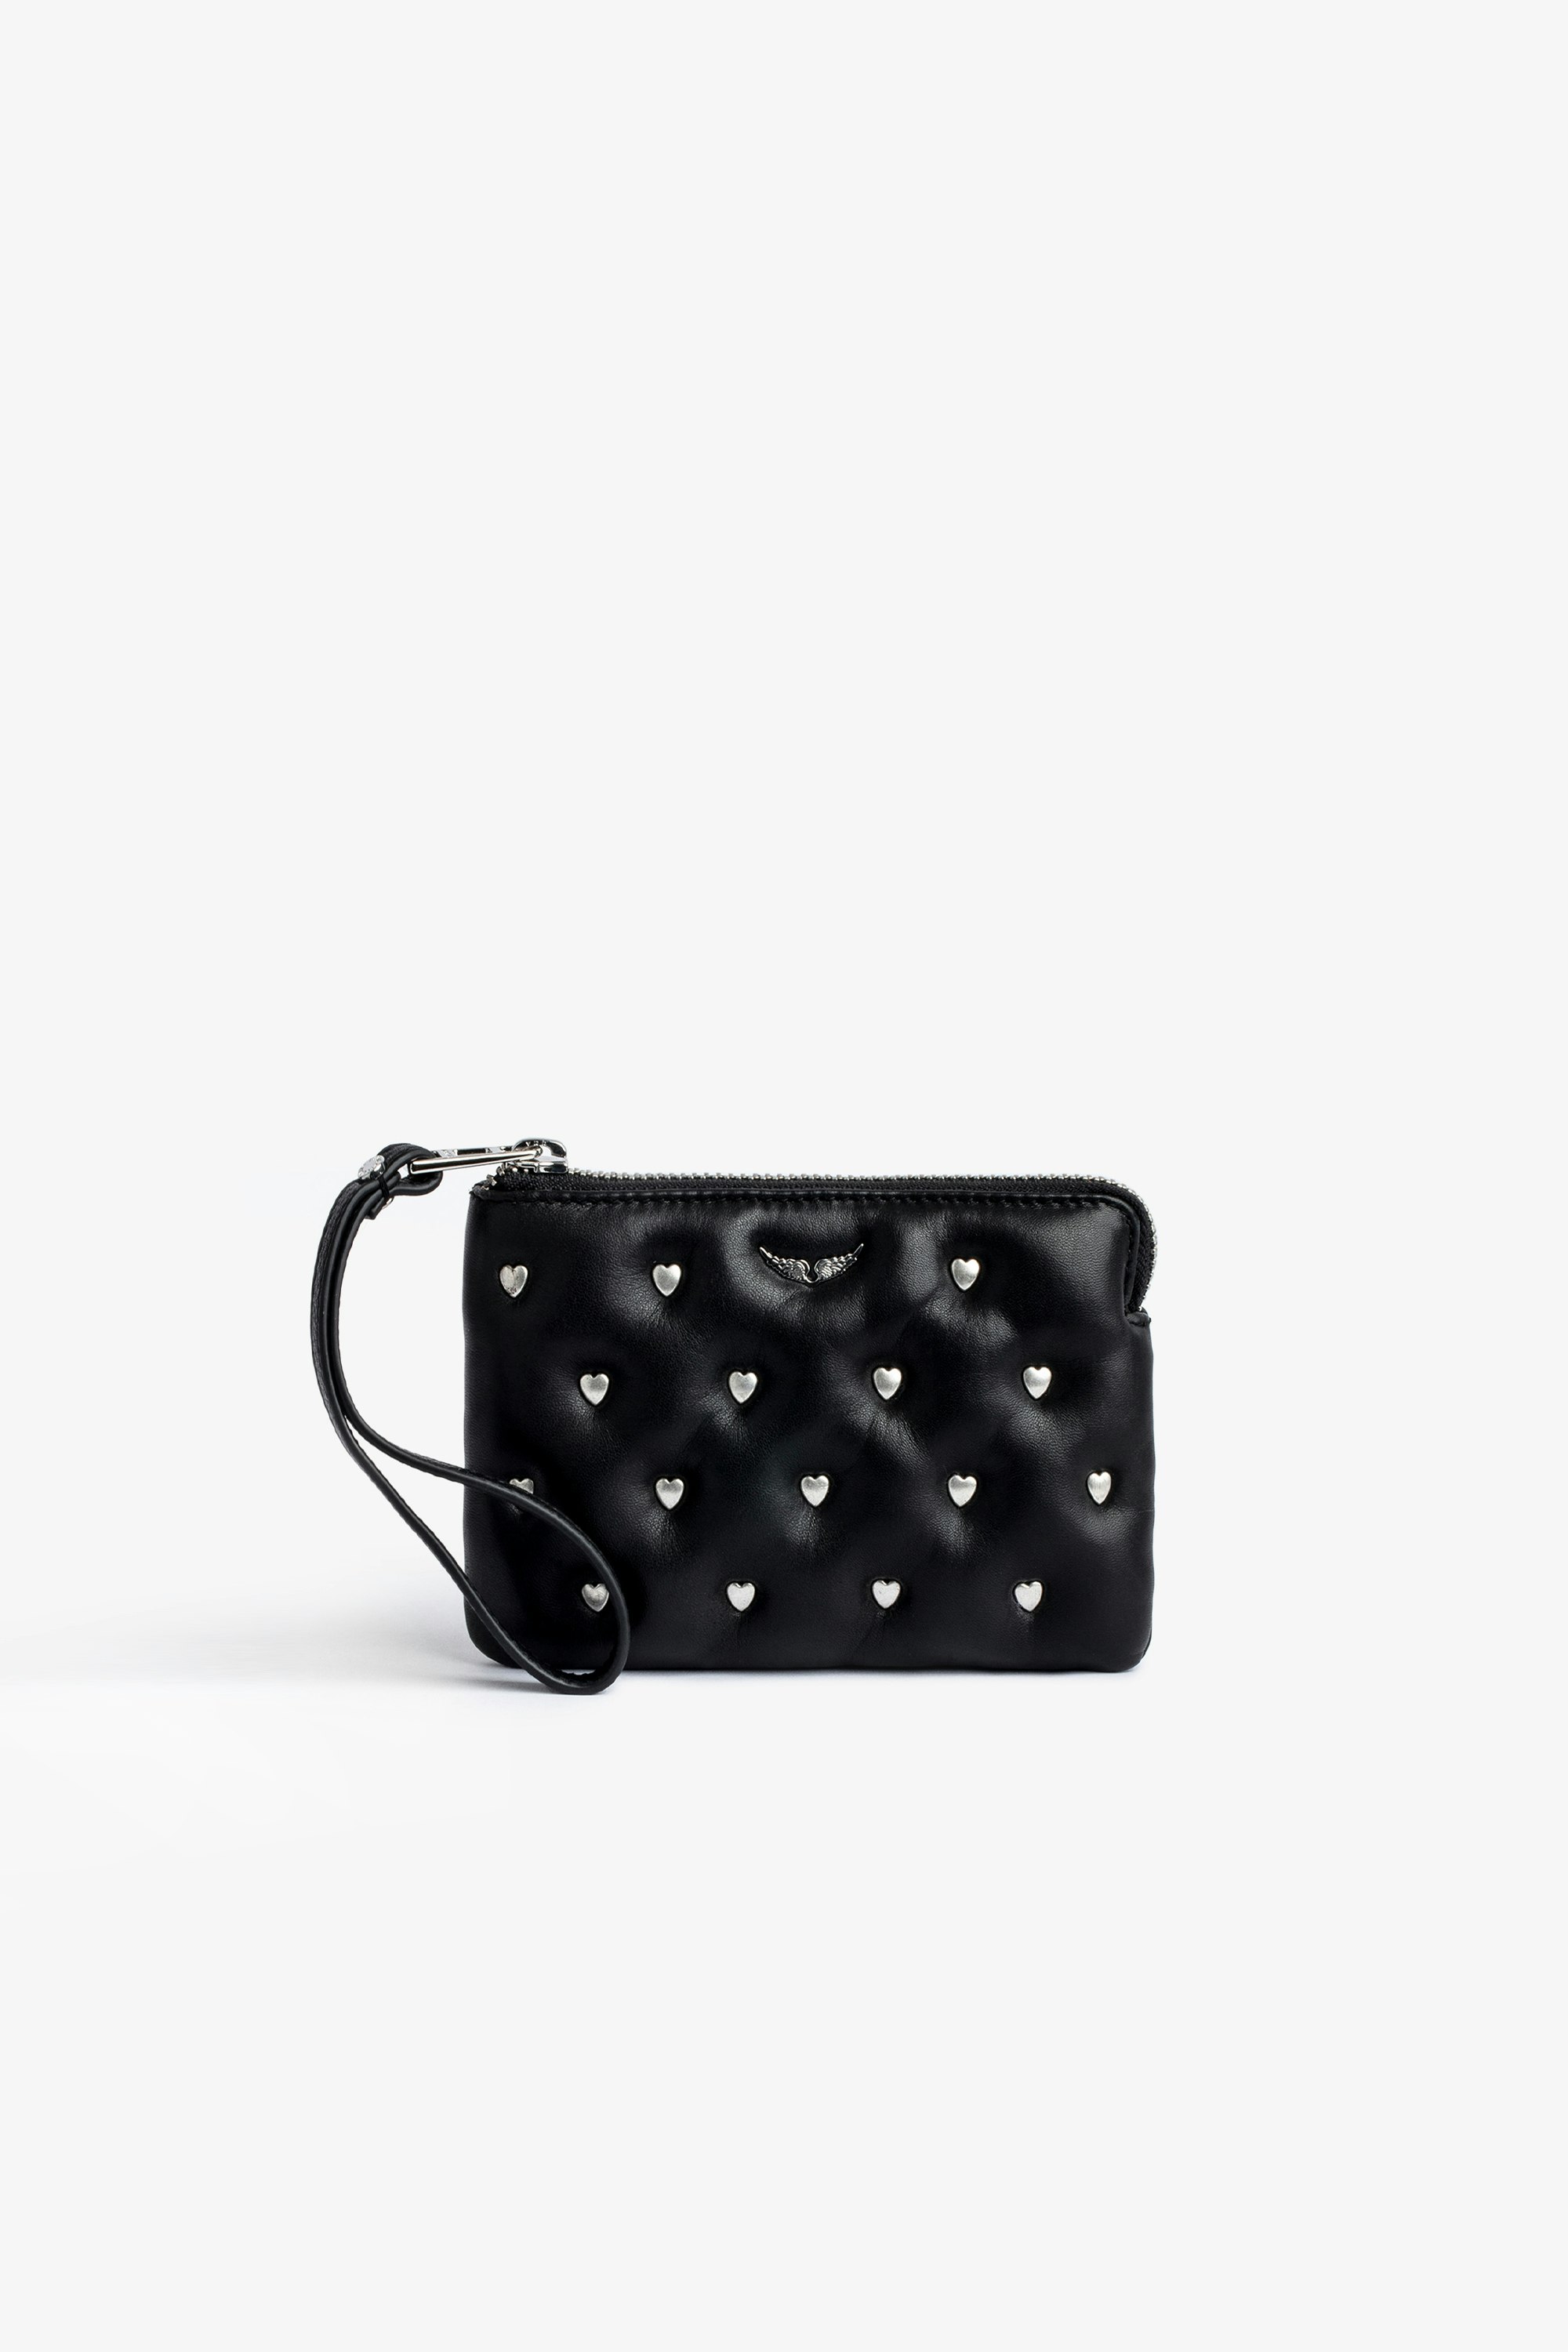 Mini Uma Clutch Women’s small clutch in black smooth leather with heart studs